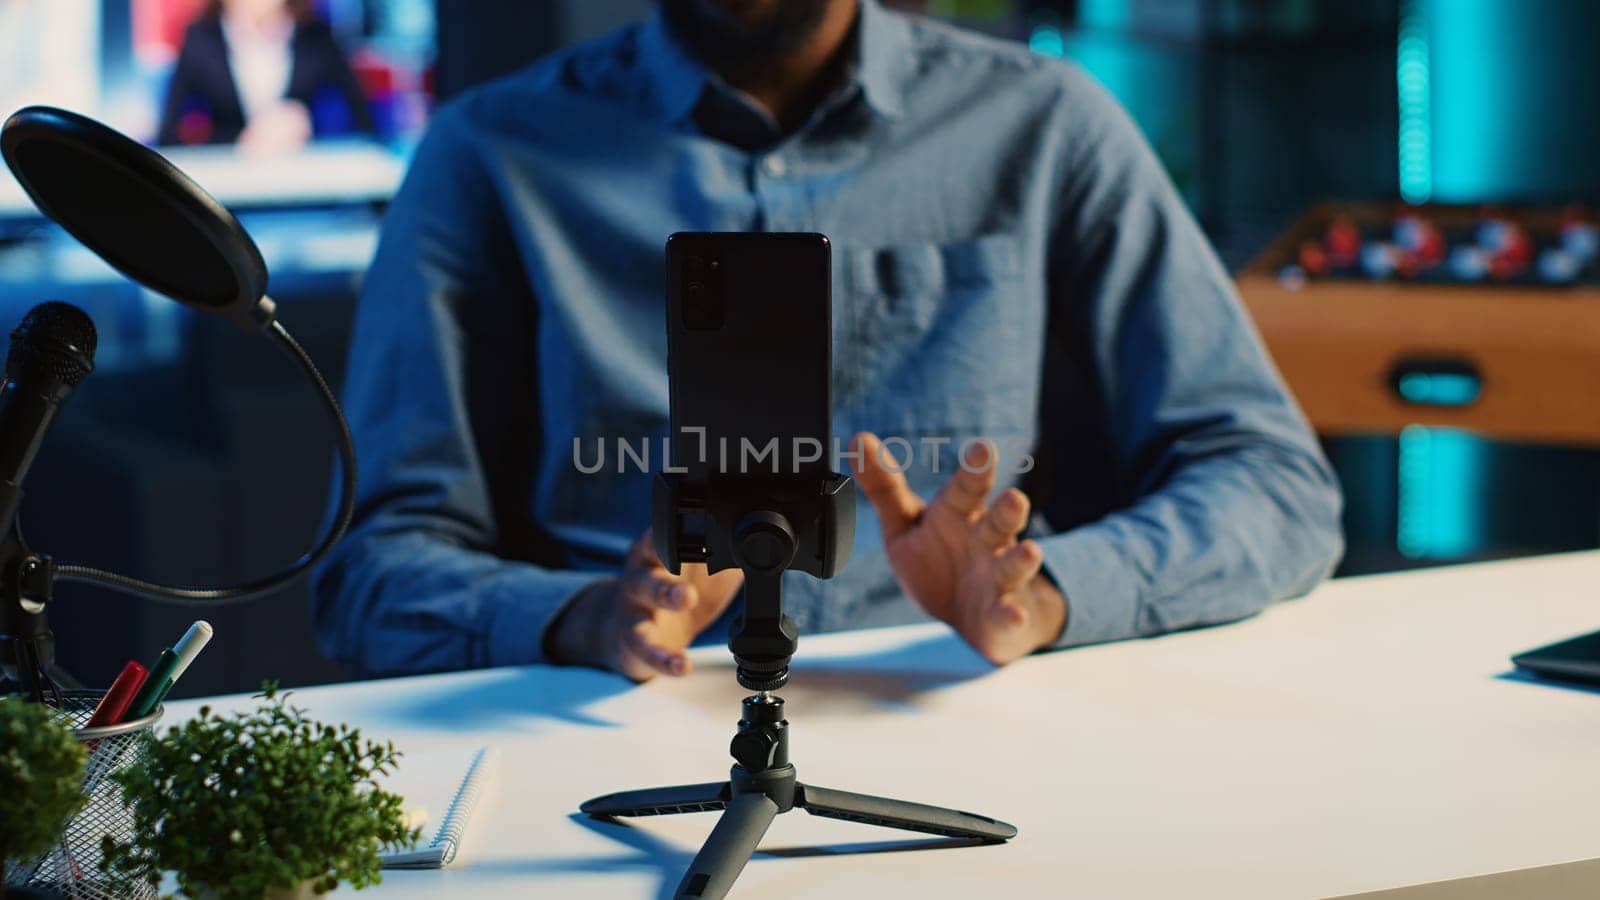 Phone on holder used by content creator by DCStudio